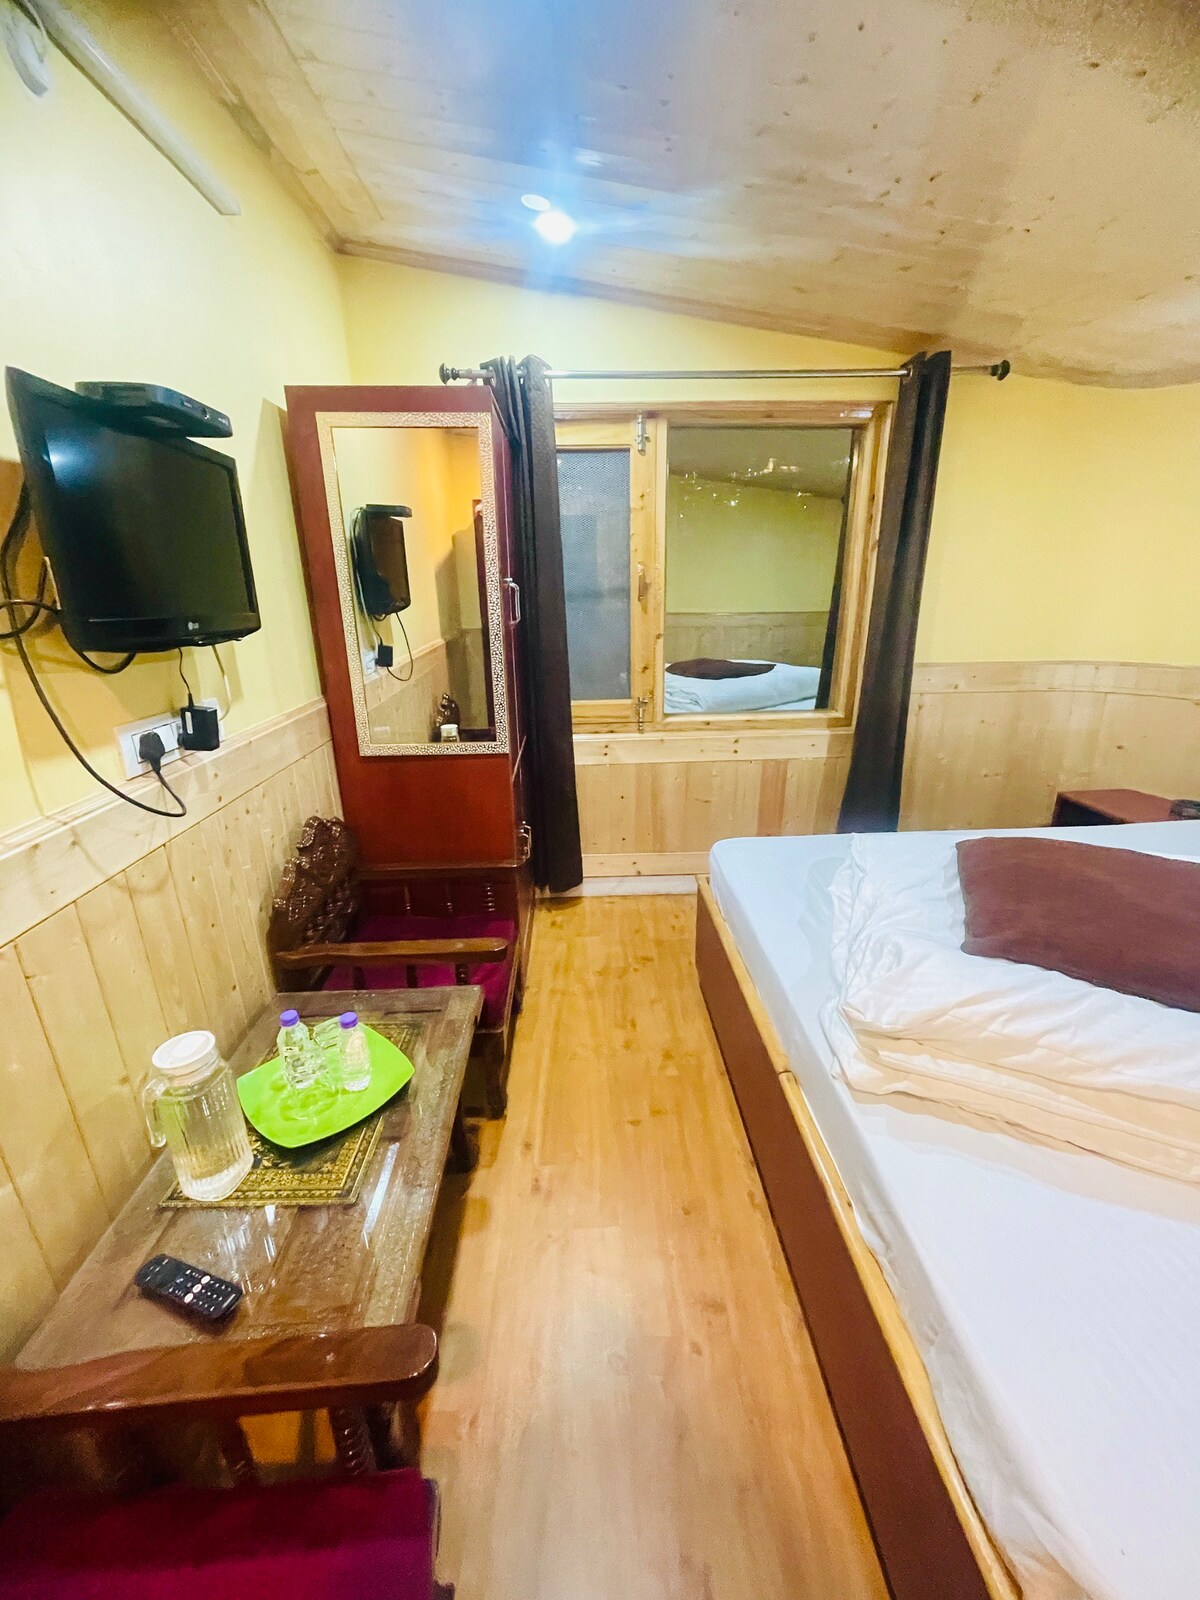 Entire Floor Wooden Lodge Attic 2BHK MallRoad View